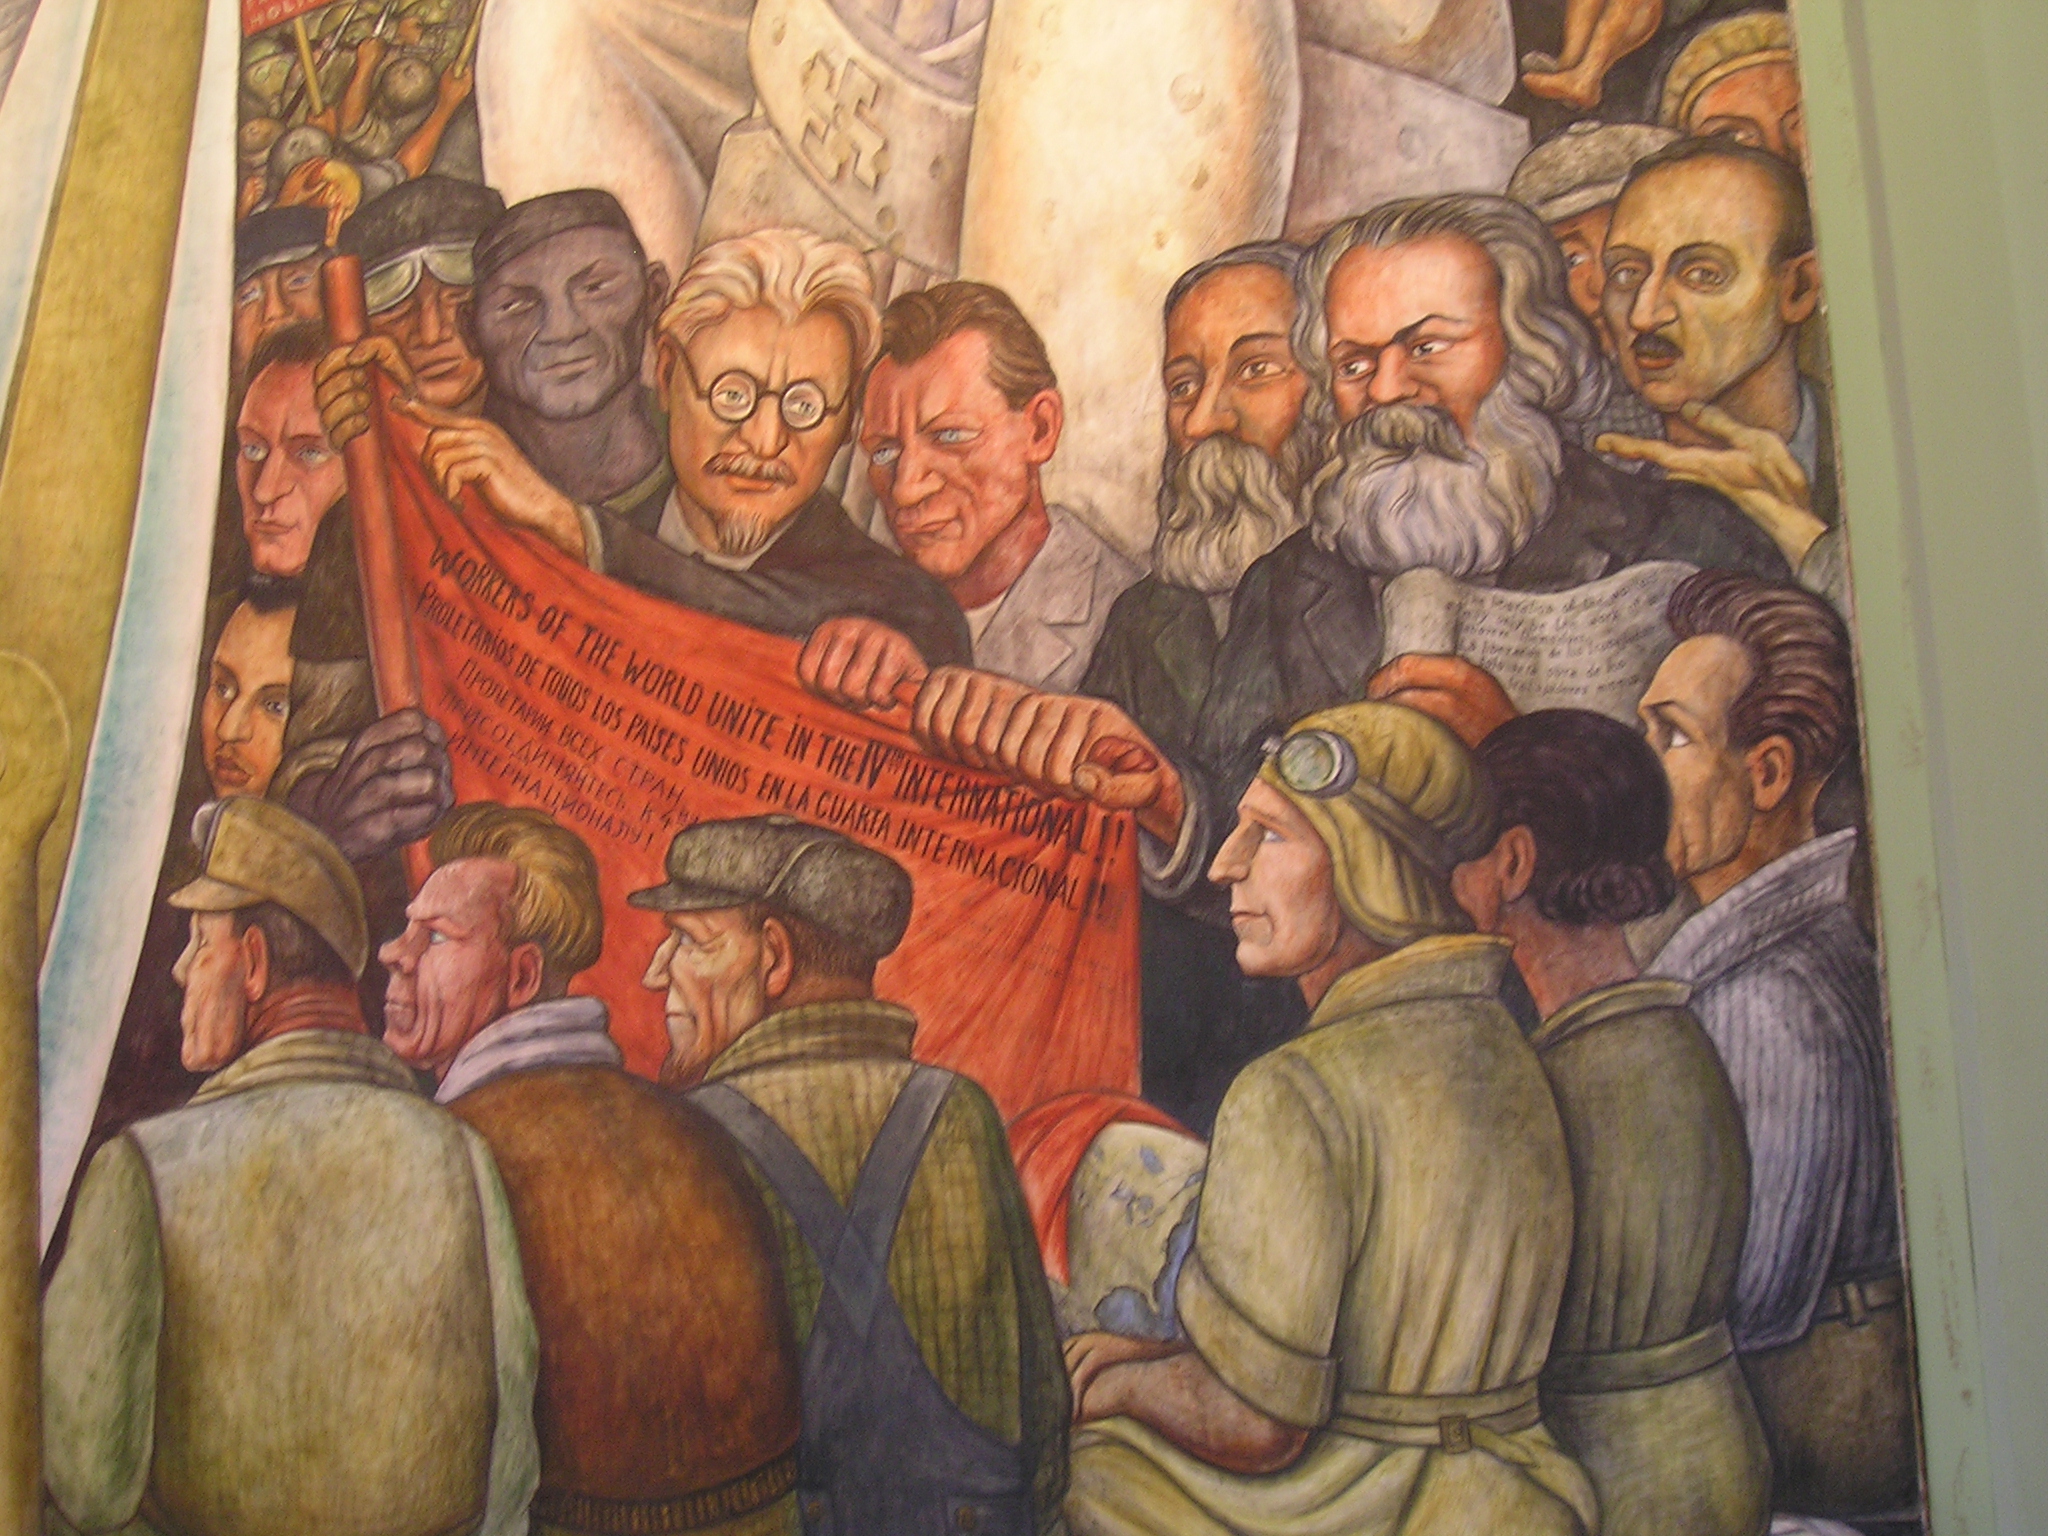 Trotsky (alongside Karl Marx and Friedrich Engels) as depicted in Rivera's 1934 painting